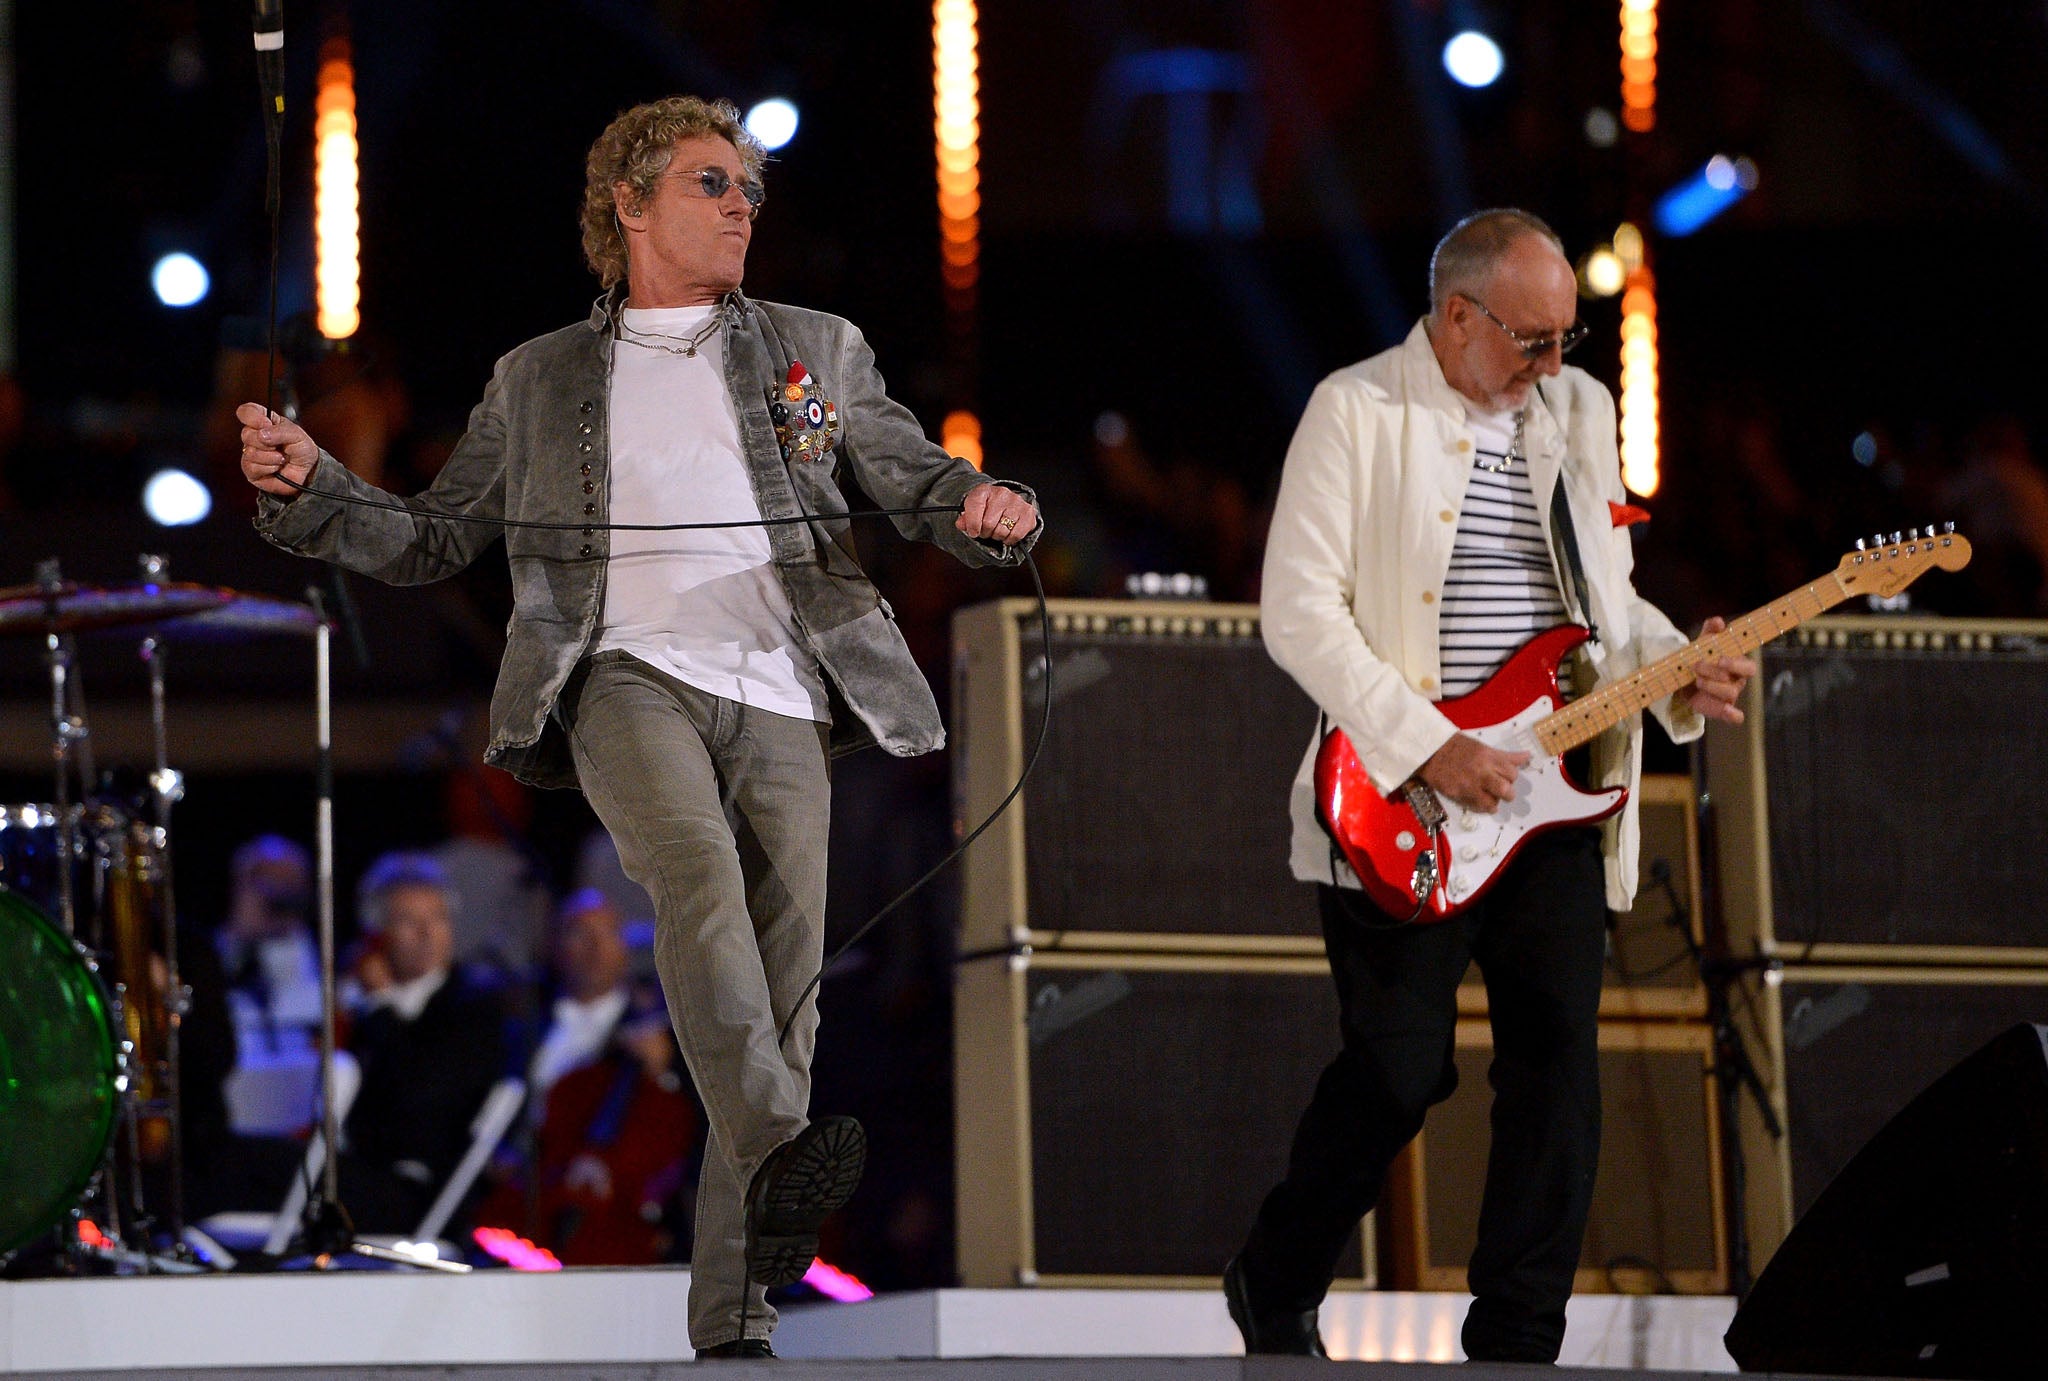 Roger Daltrey and Pete Townshend performing at the Olympics Closing Ceremony